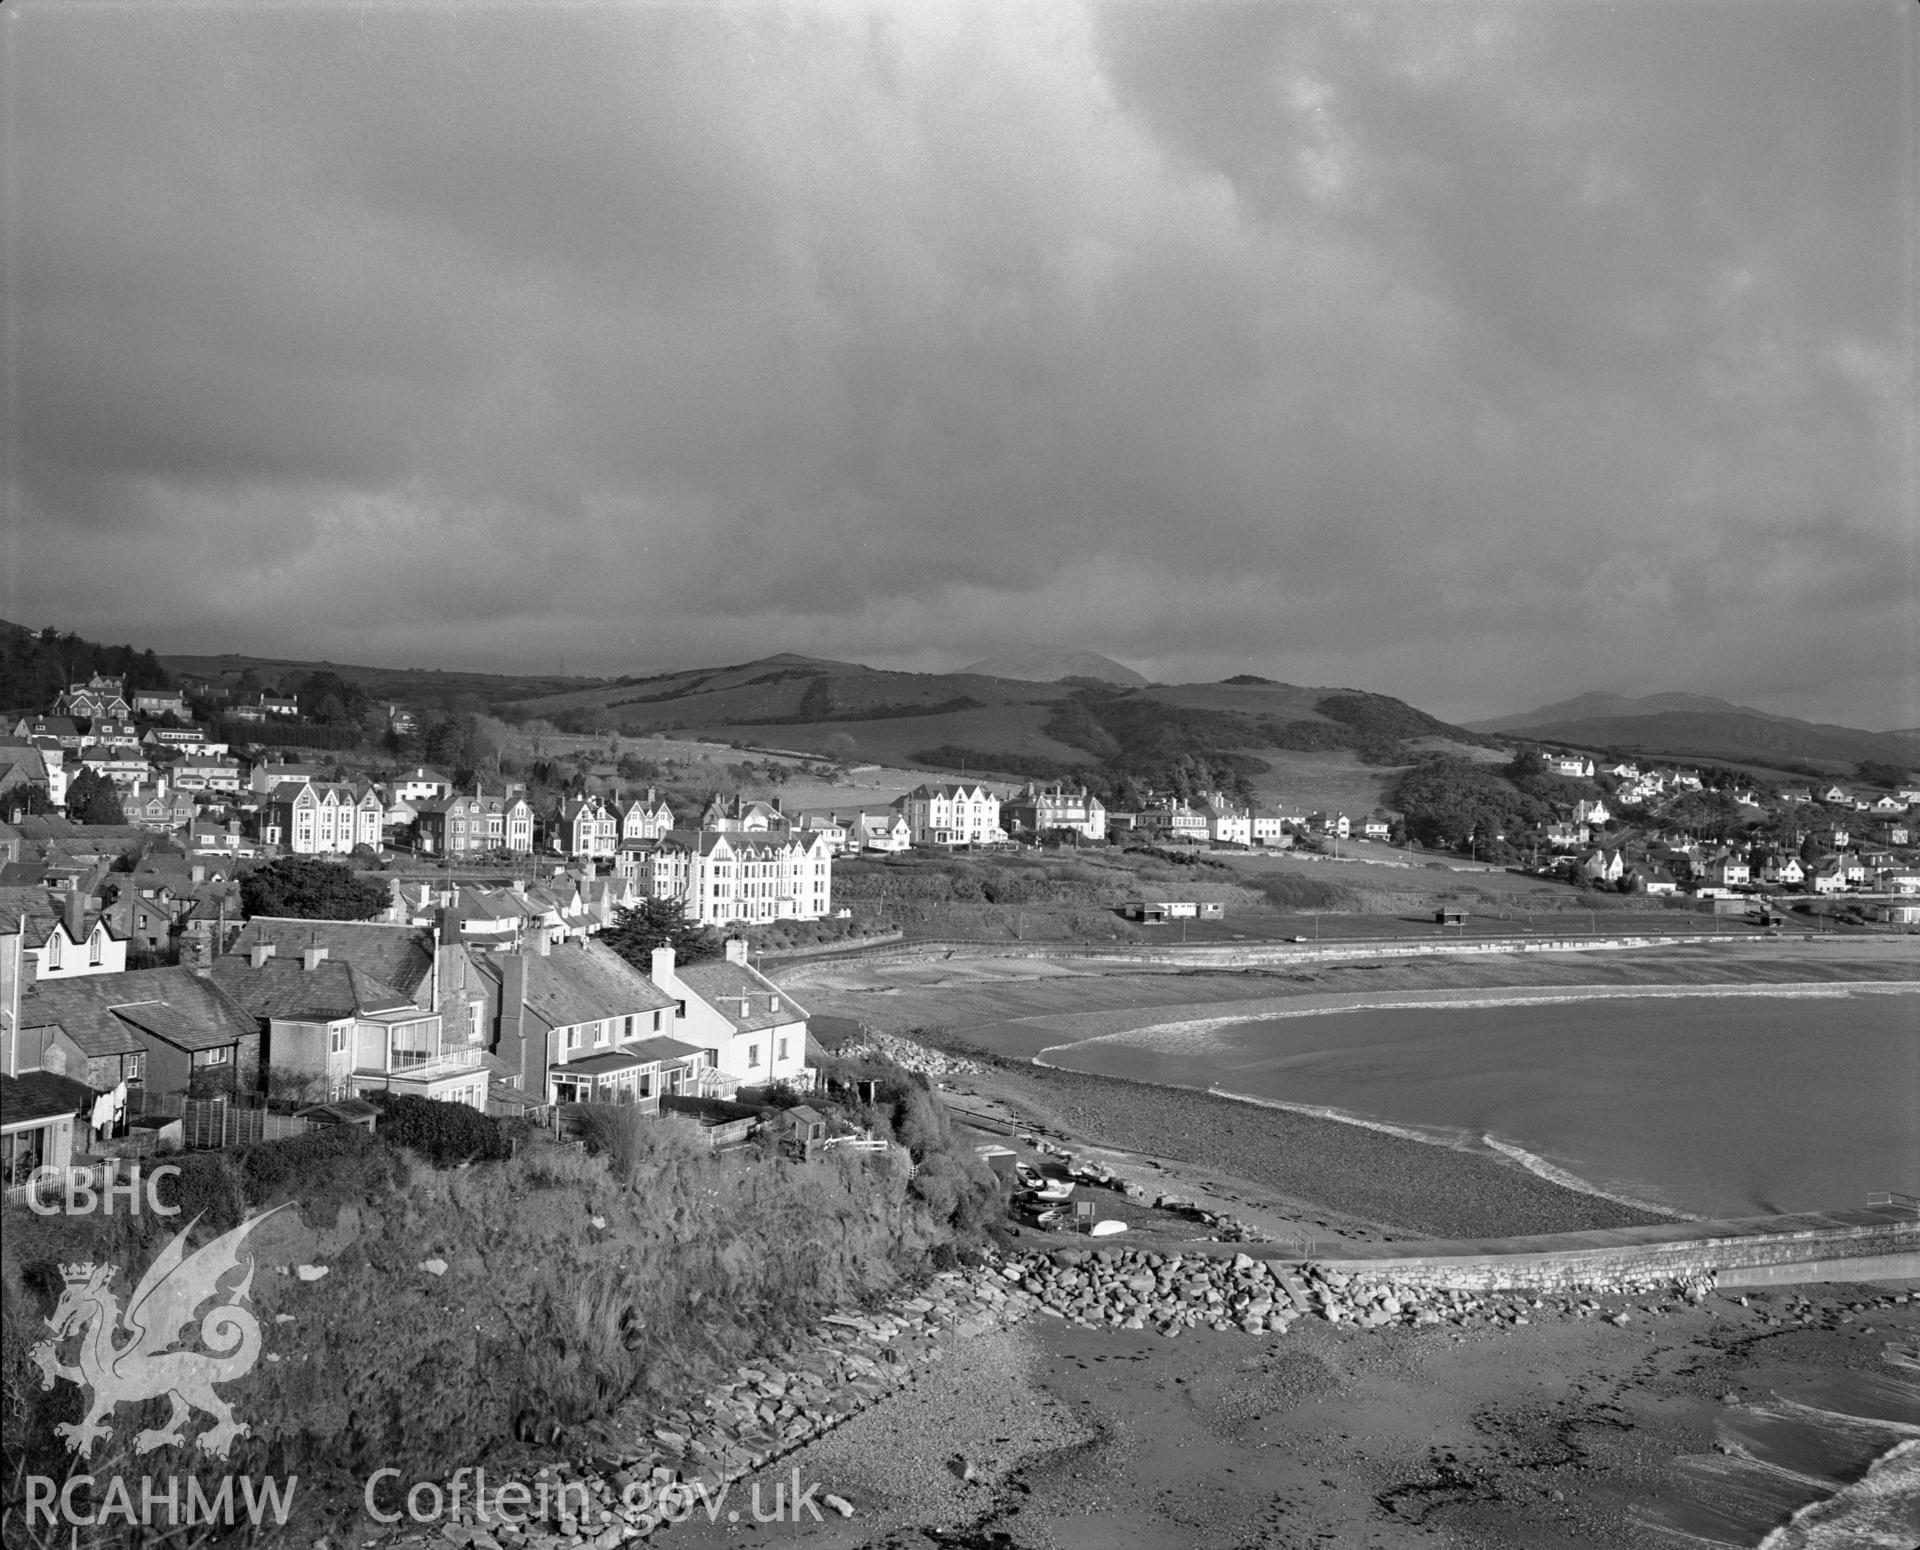 Photographic negative showing view of Criccieth from the castle; collated by the former Central Office of Information.